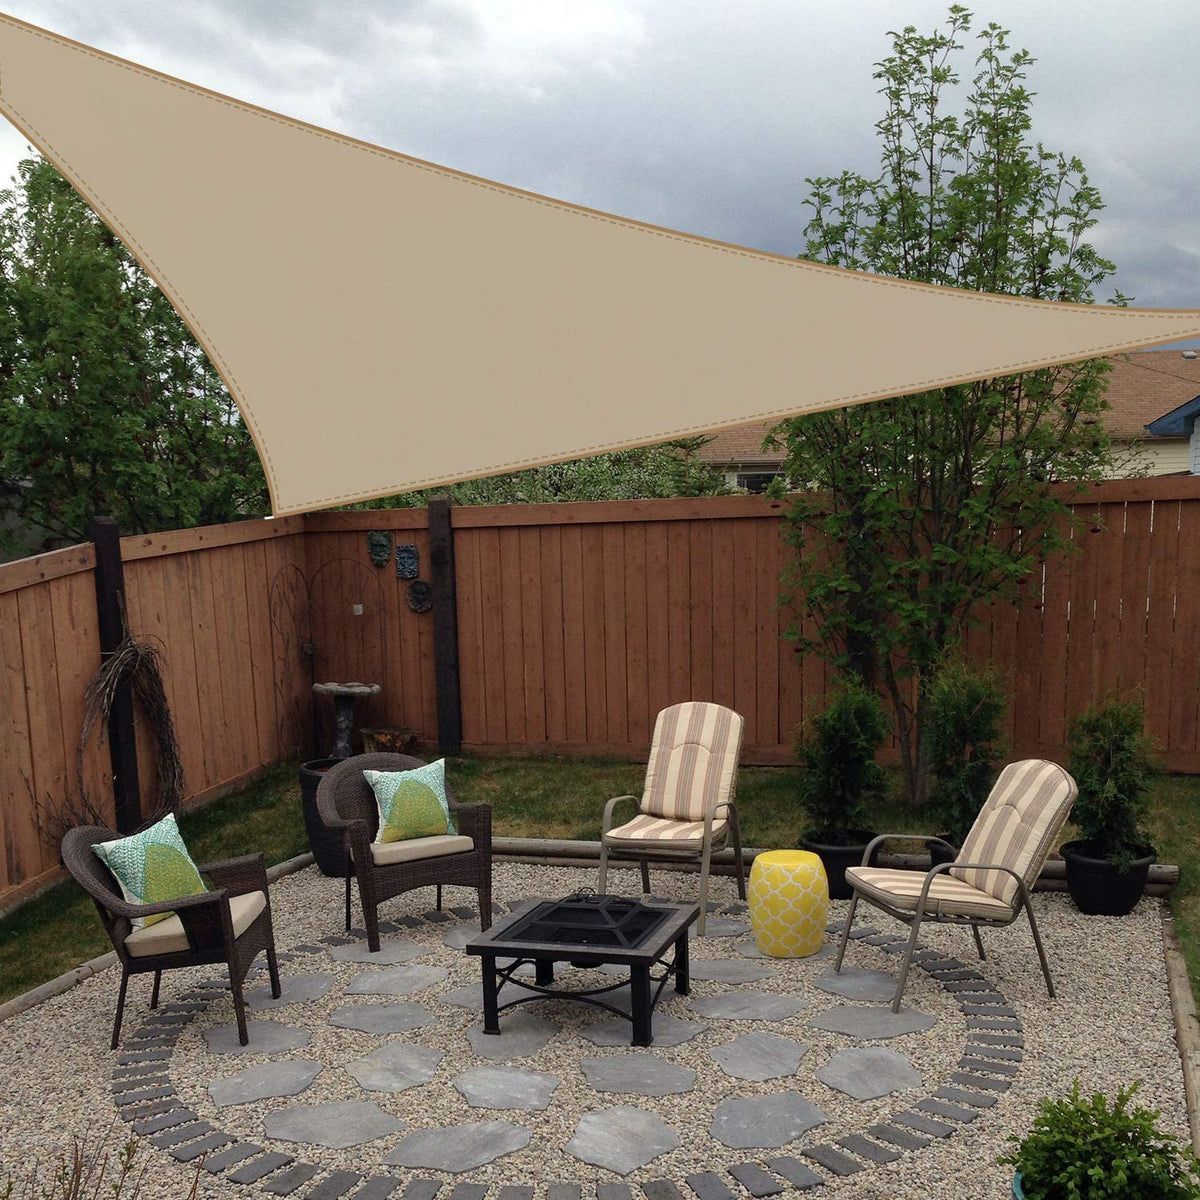 Triangle 10'x10'x10' Sun Shade Sail Canopy with Rope Waterproof Block Sun  Shade UV Block for Patio Outdoor Facility and Activities